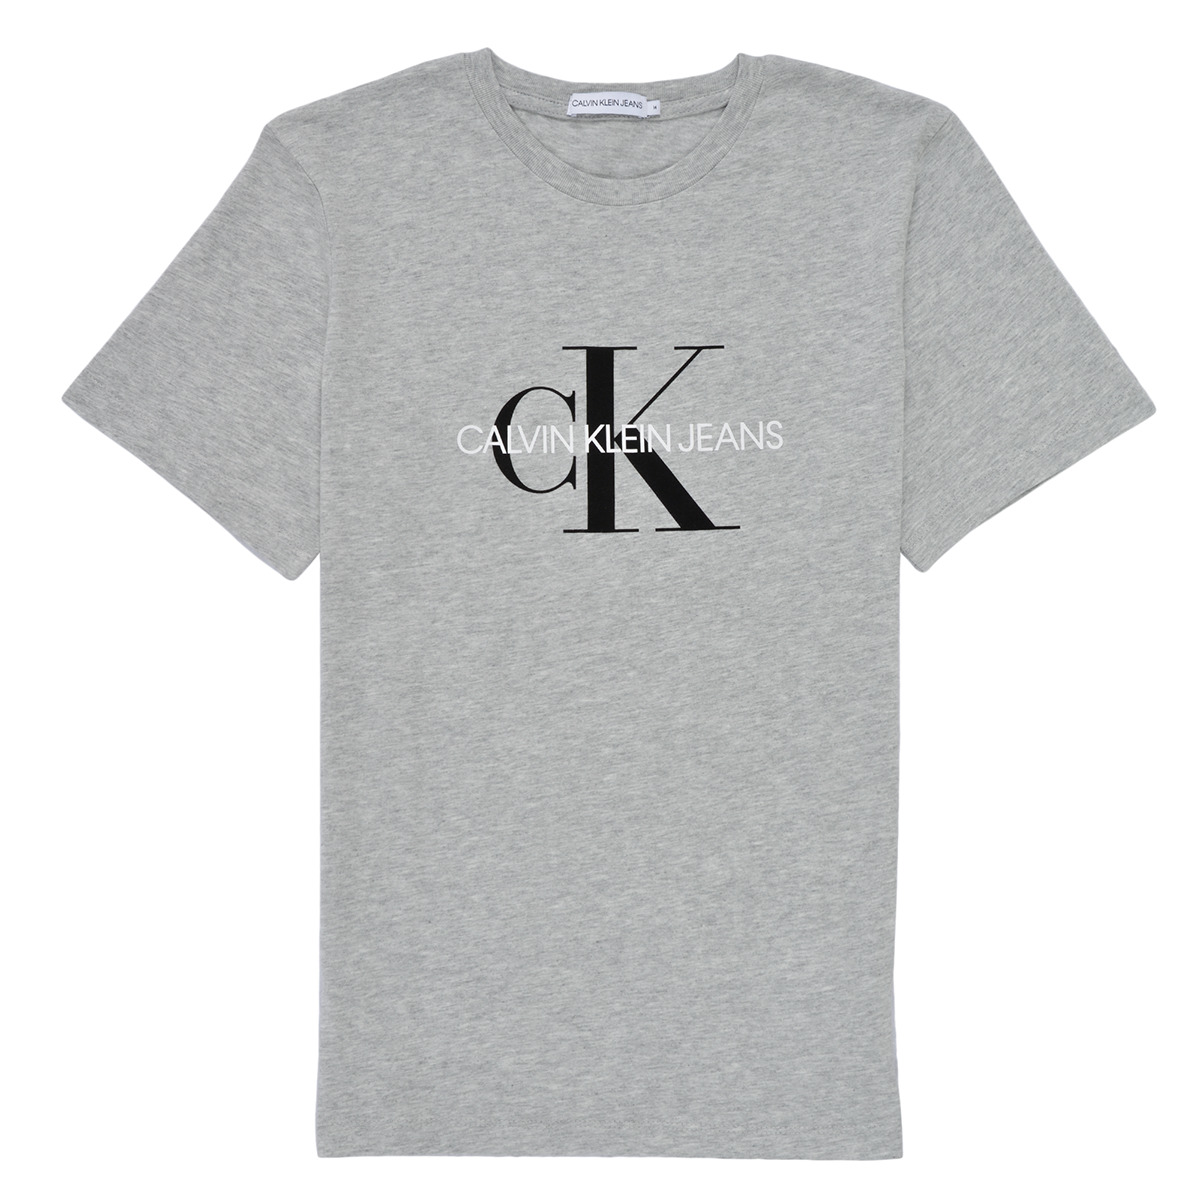 t-shirts Klein ! € Calvin - Child delivery MONOGRAM 30,40 short-sleeved - | Clothing Europe Grey Fast Jeans Spartoo